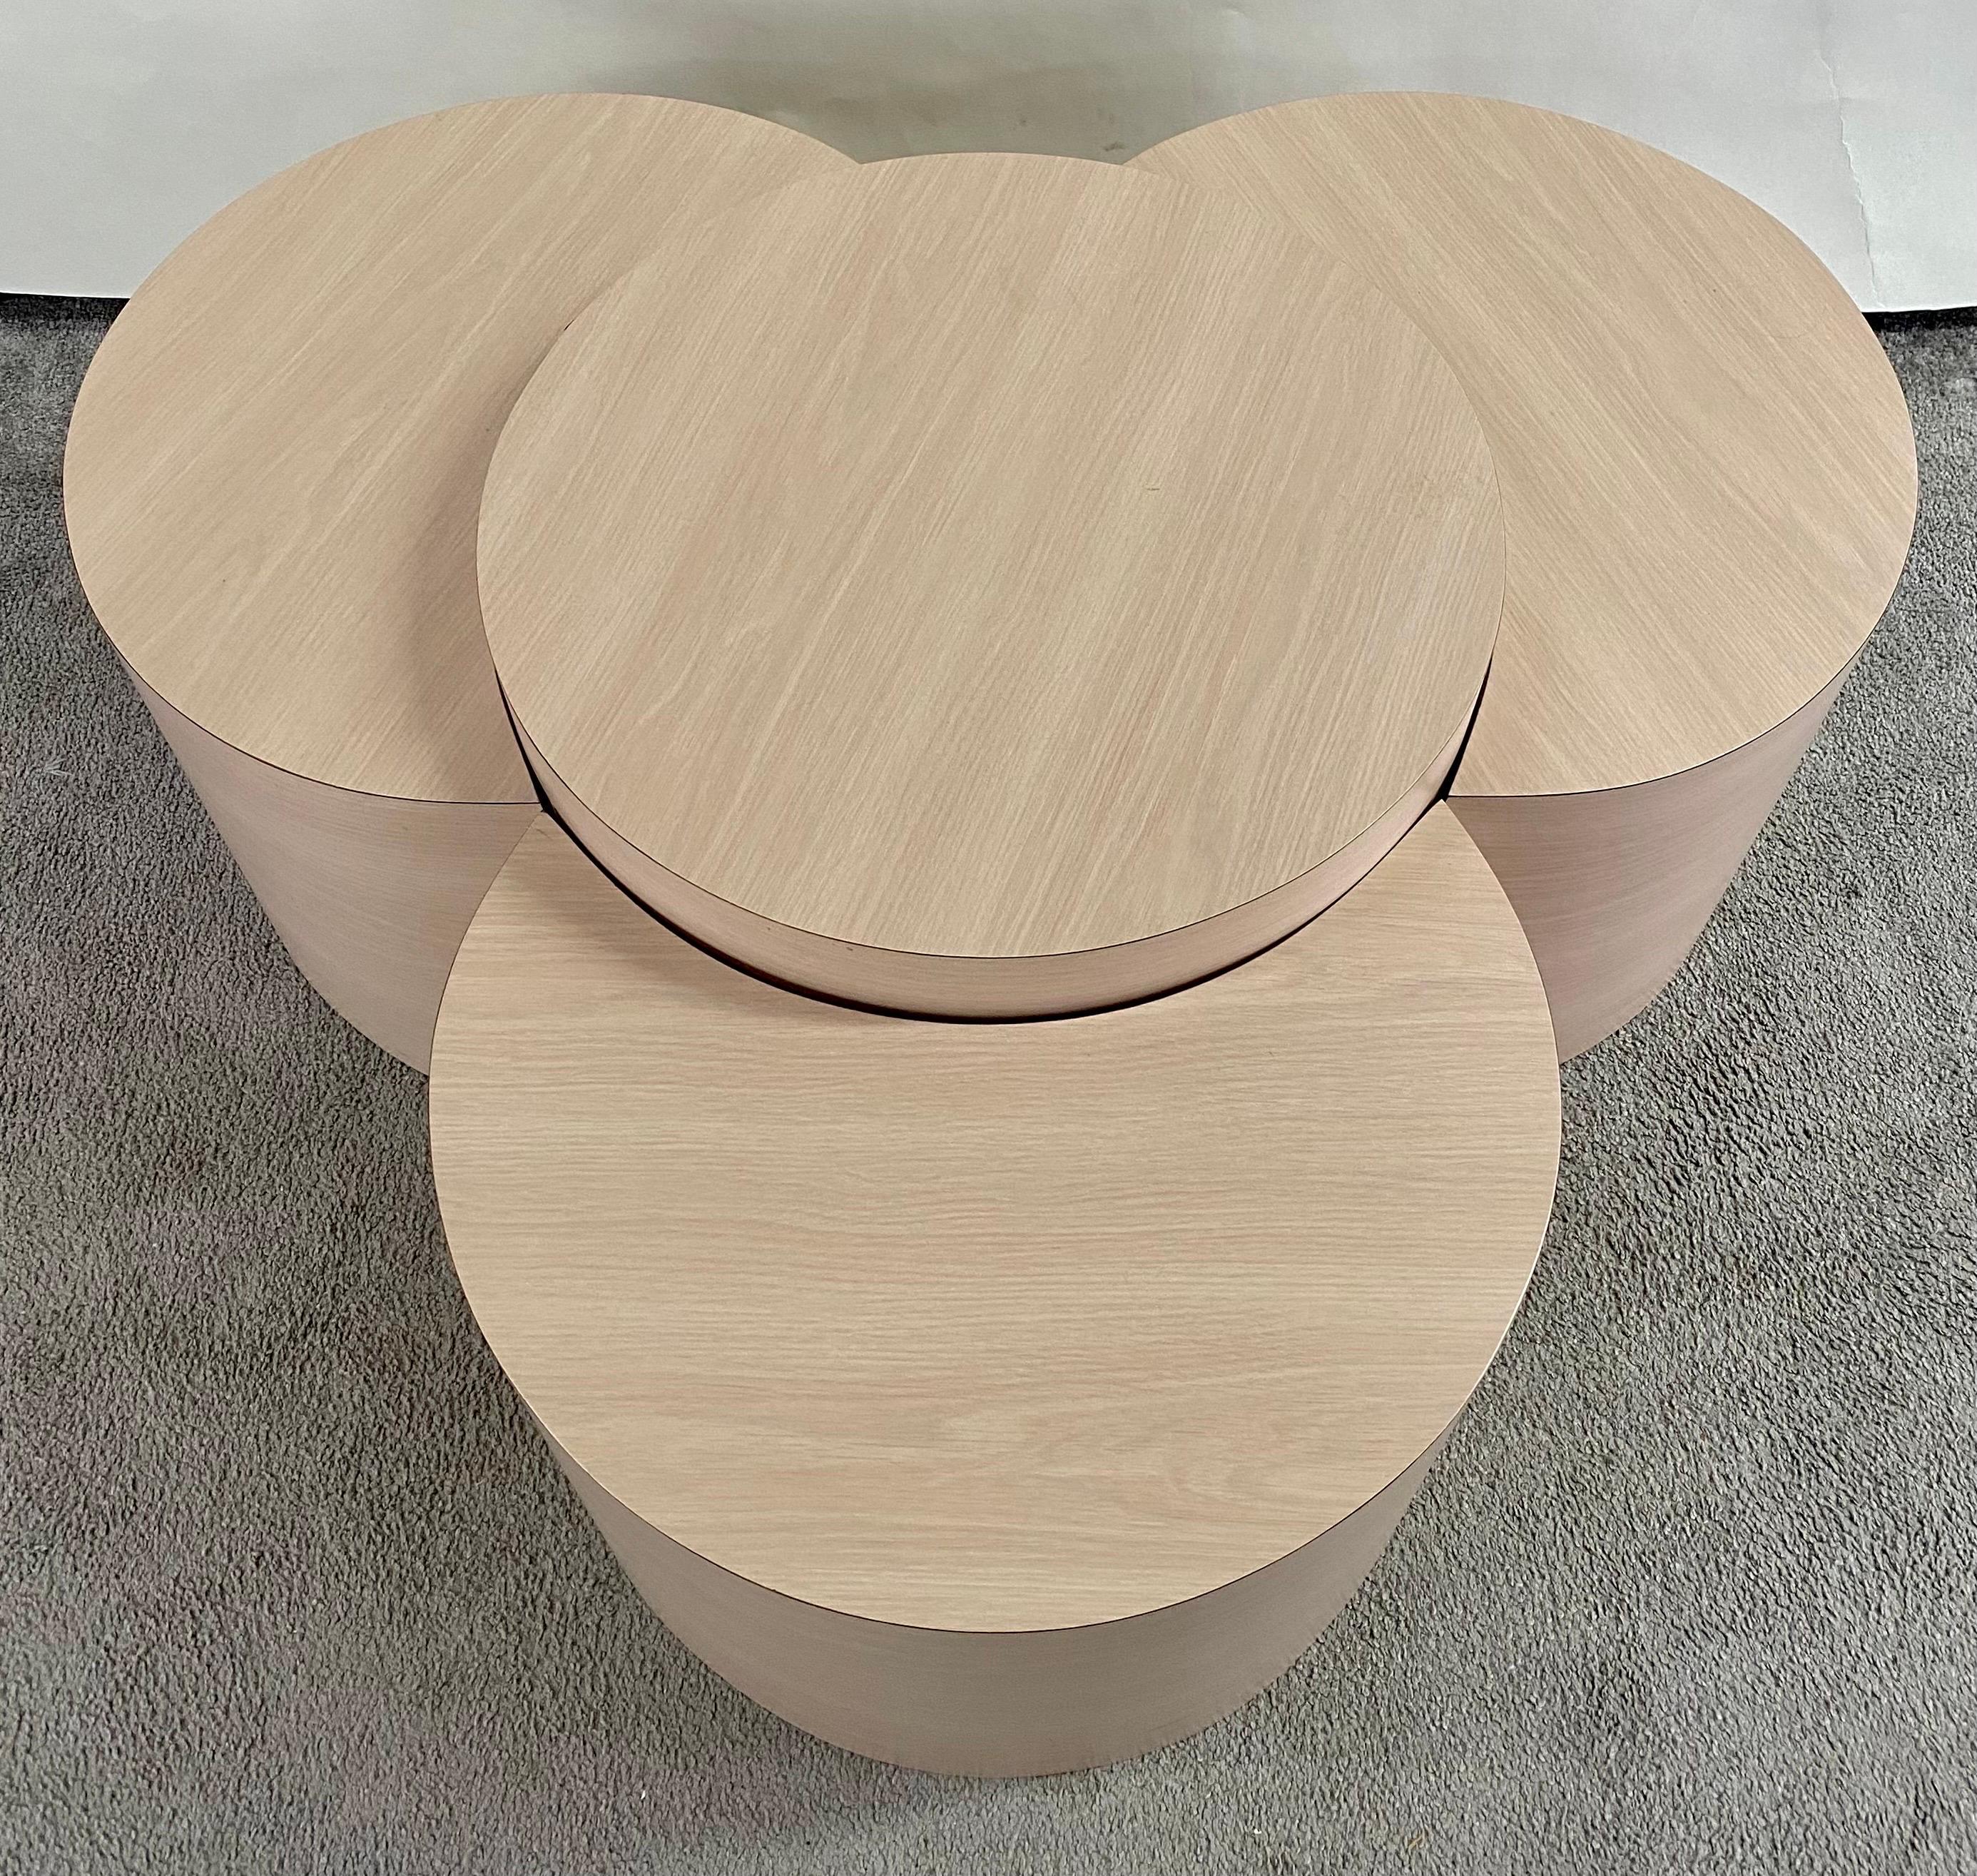 Introducing a truly versatile addition to your living space, a post-modern four-piece Formica laminate drum table set, elegantly finished in a soothing light pink hue. These tables offer not only a delightful touch of retro charm but also a world of